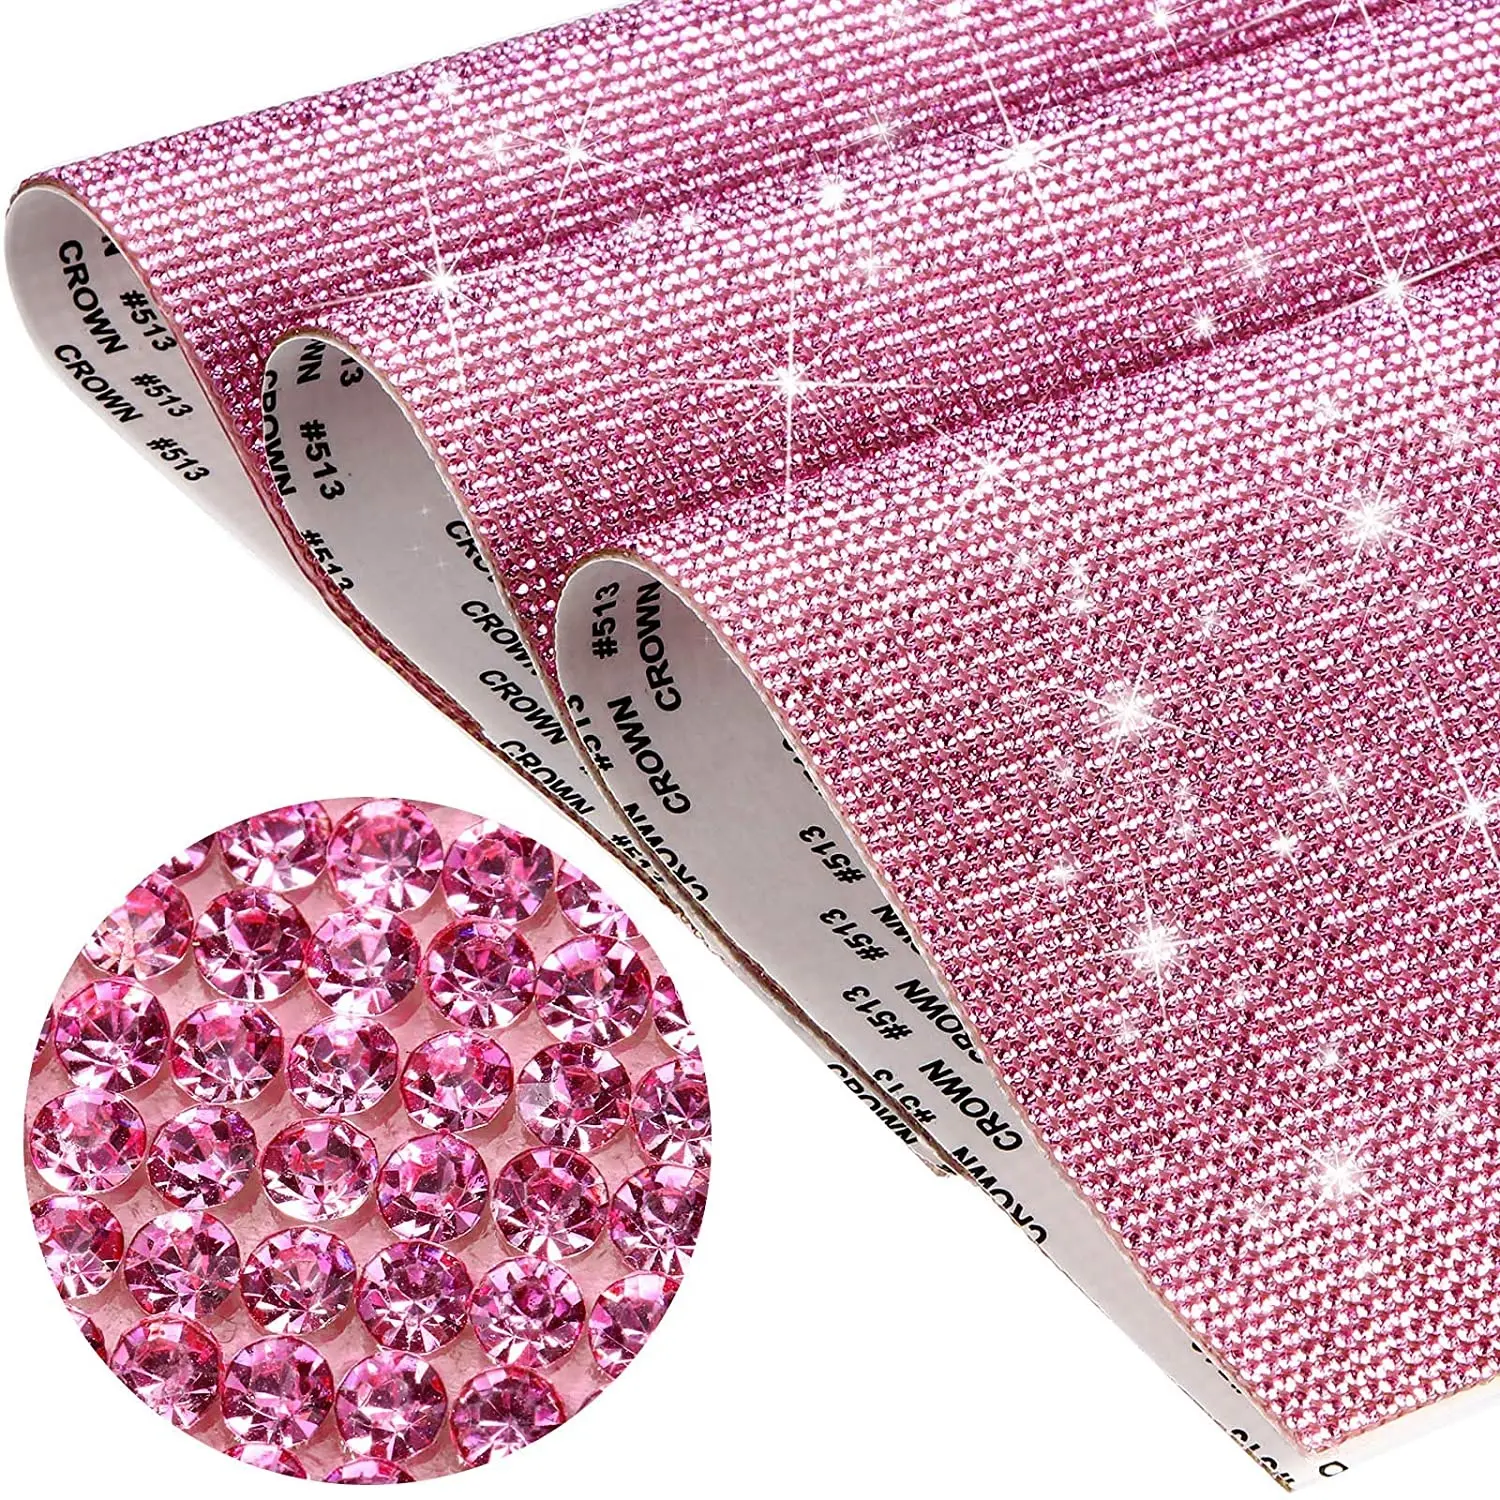 Pink Glitter Rhinestone Sticker Hotfix Crystal Self Adhesive Roll with 2 mm Rhinestones for Car and Gift Decoration